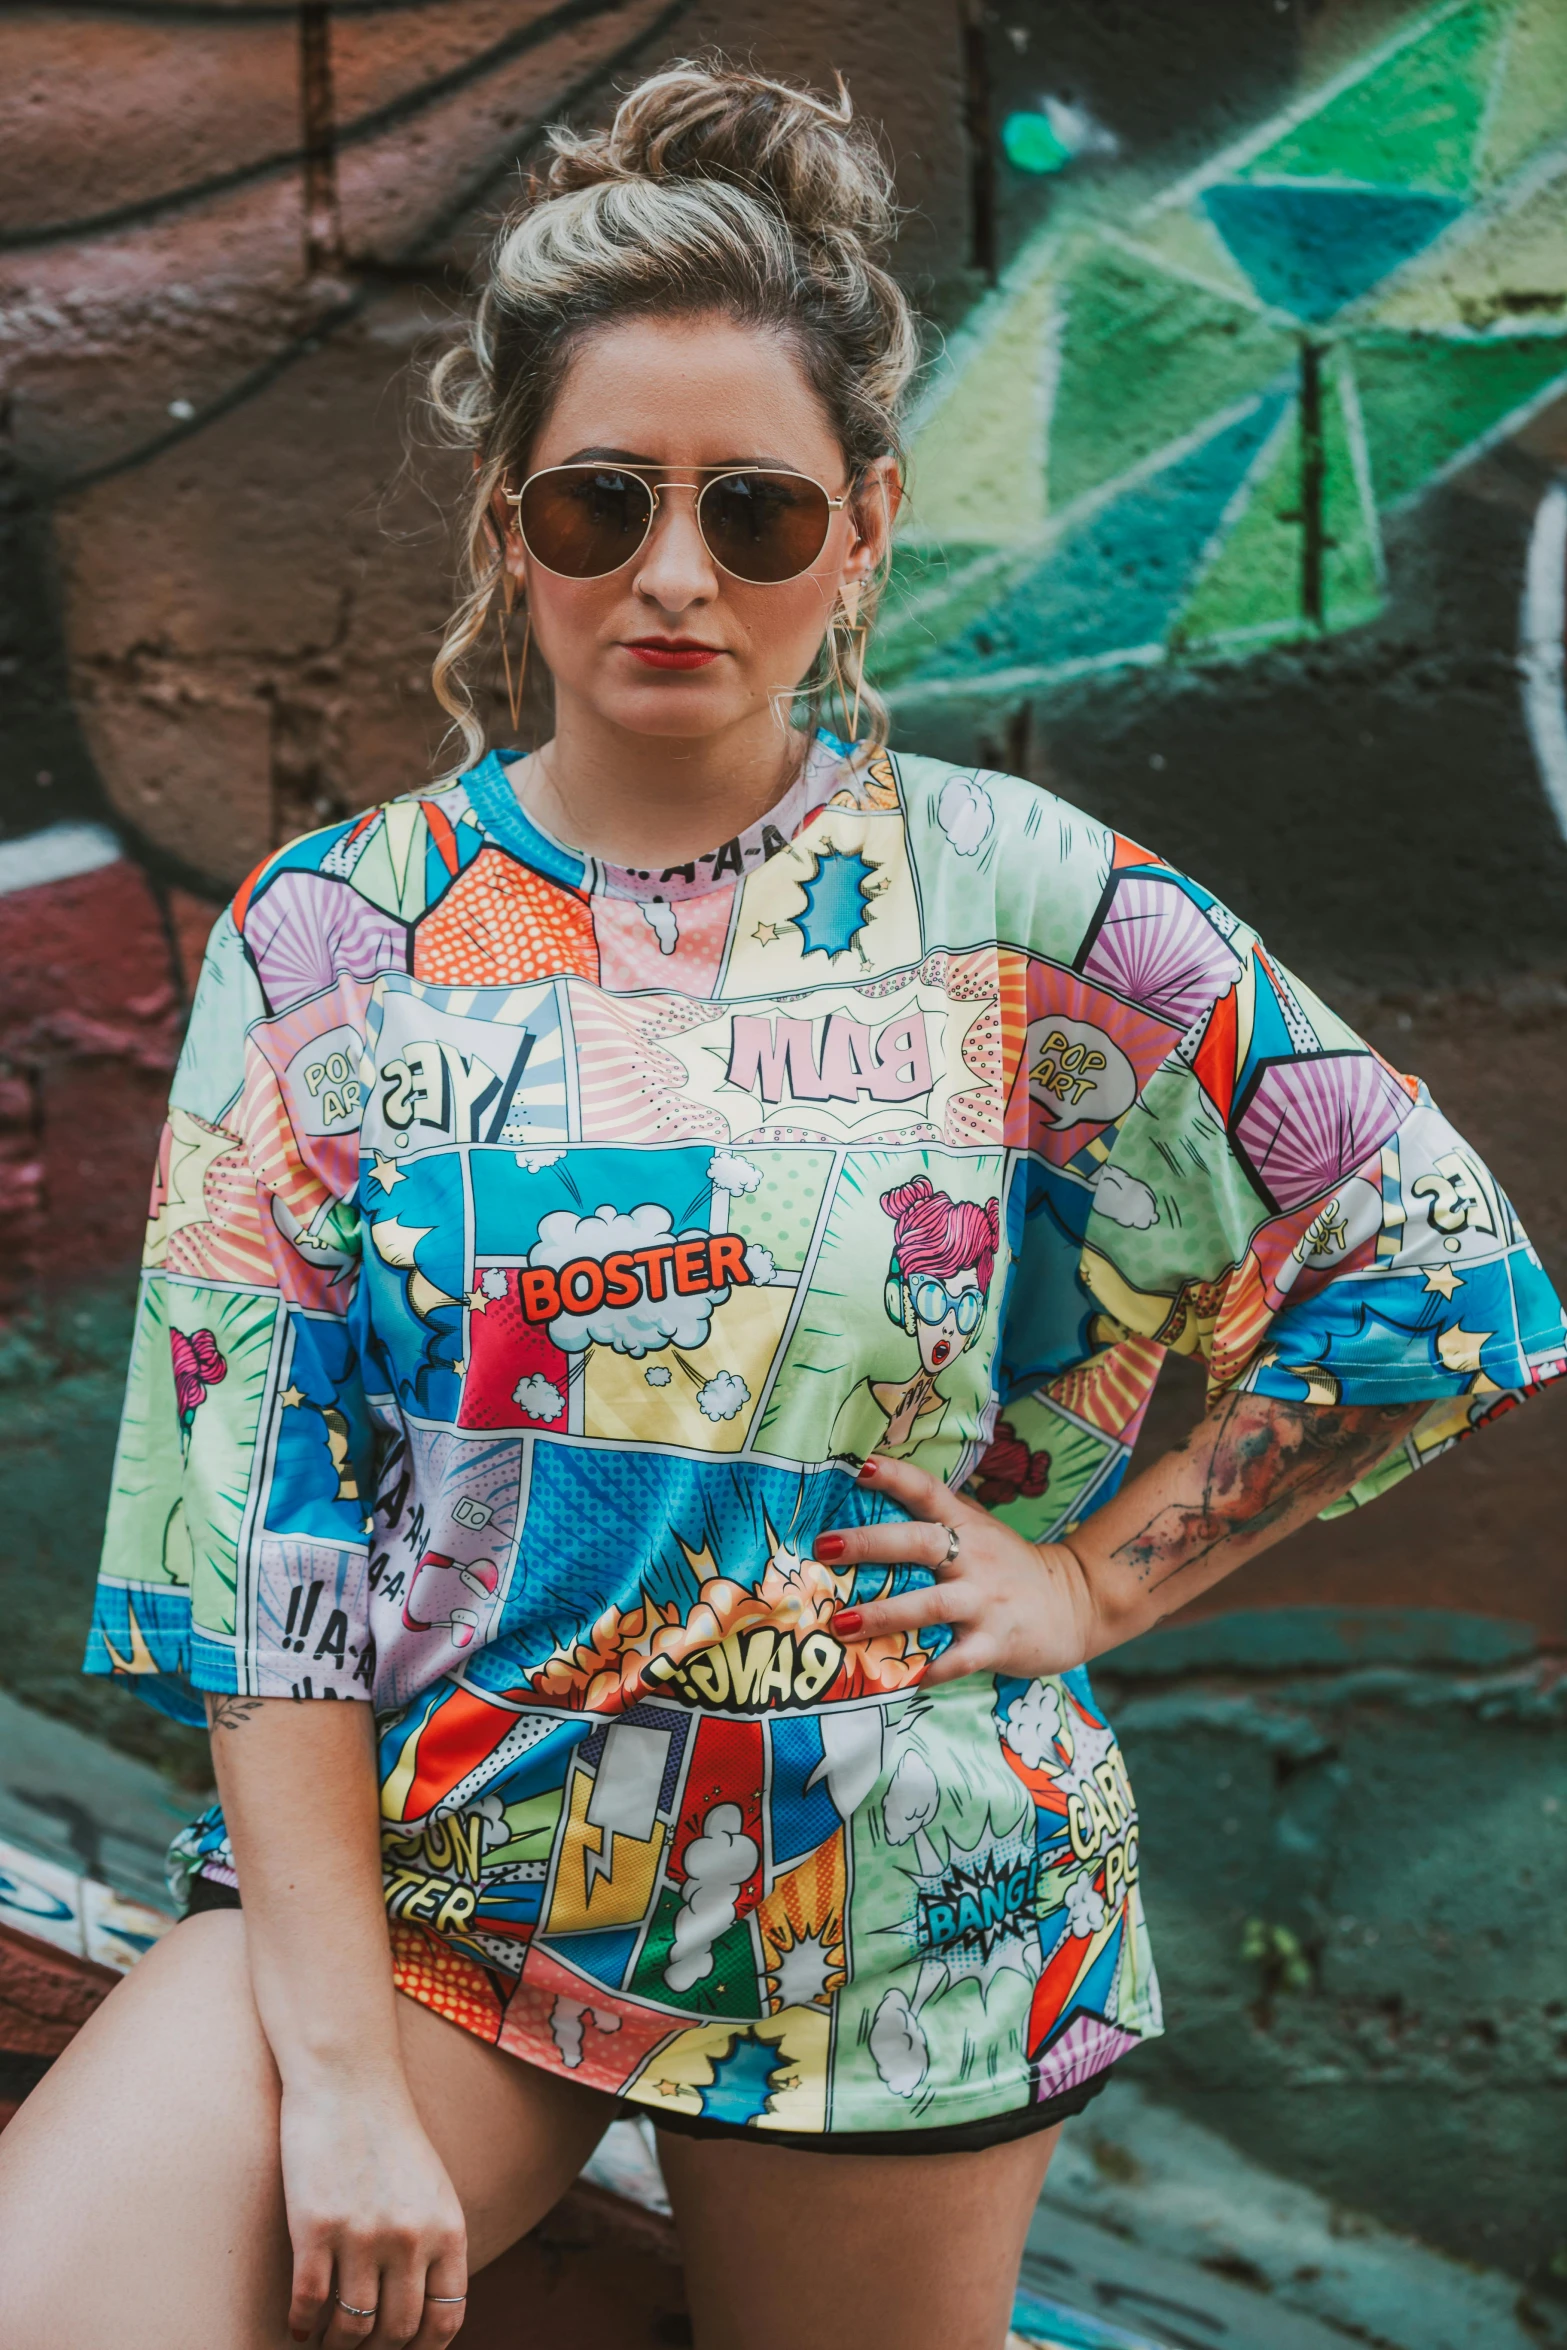 a woman wearing sunglasses and an unoned shirt